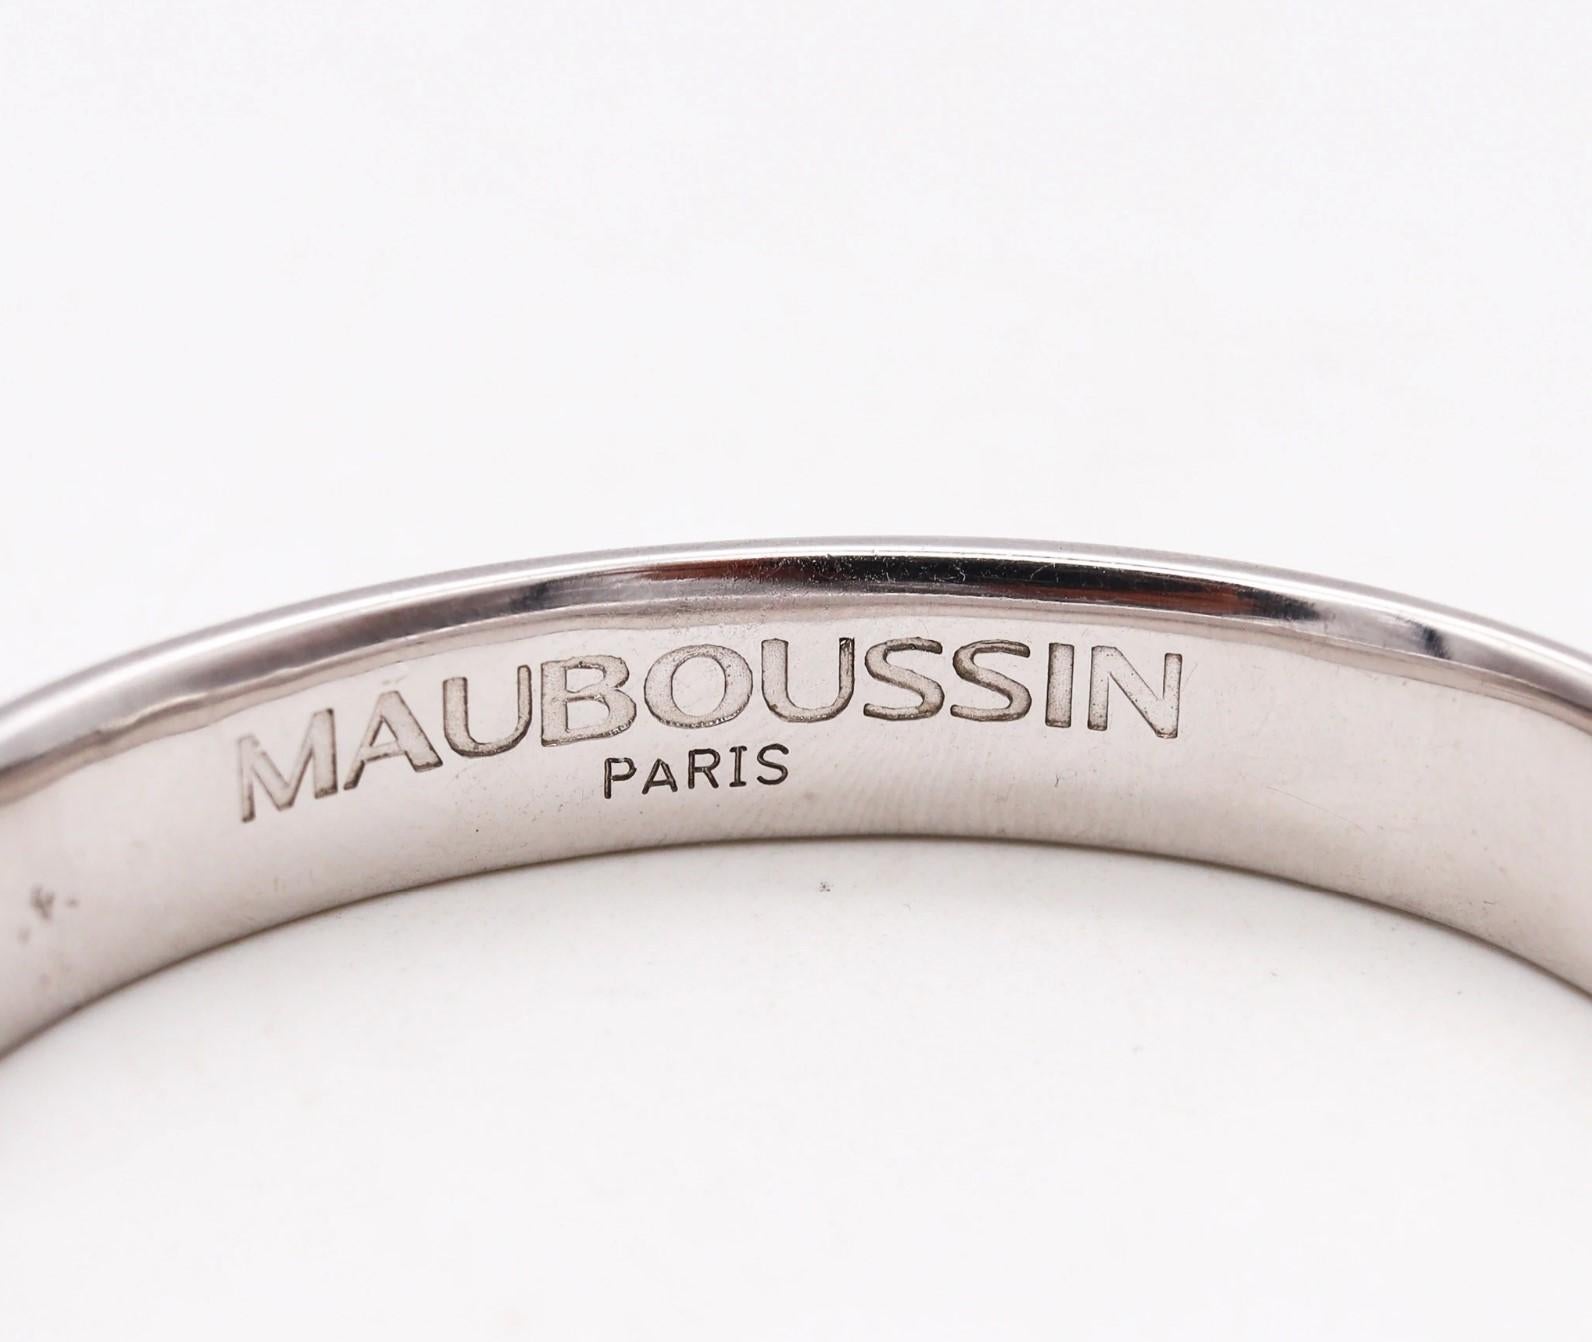 Mauboussin Paris Geometric Bangle Bracelet in 18Kt White Gold with Carved Nacre In Excellent Condition For Sale In Miami, FL